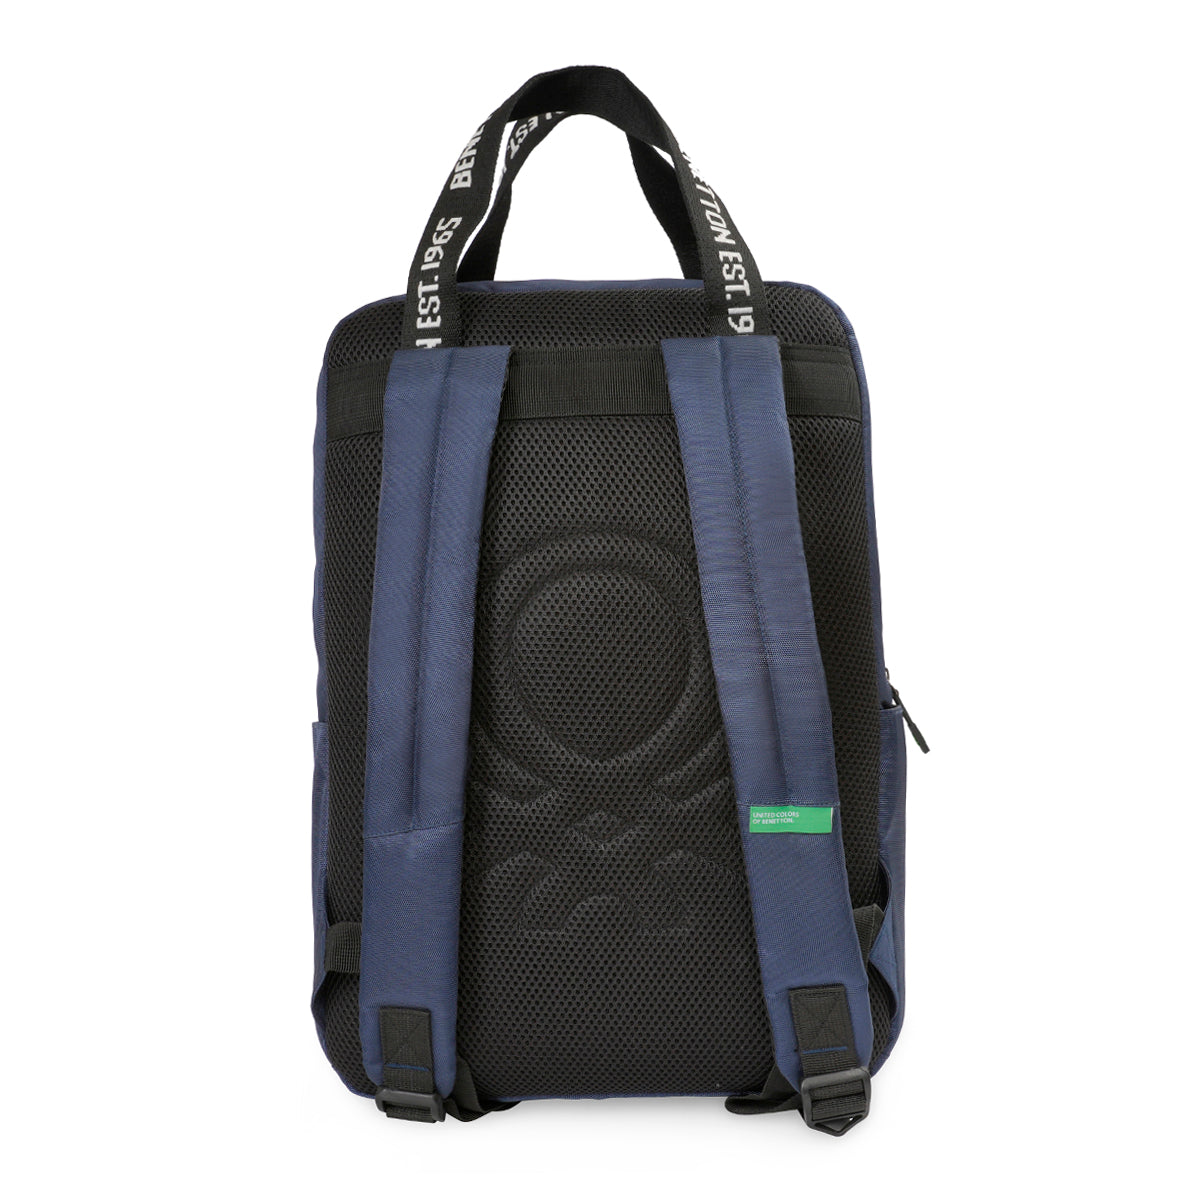 United Colors of Benetton Salerno Laptop Backpack Navy